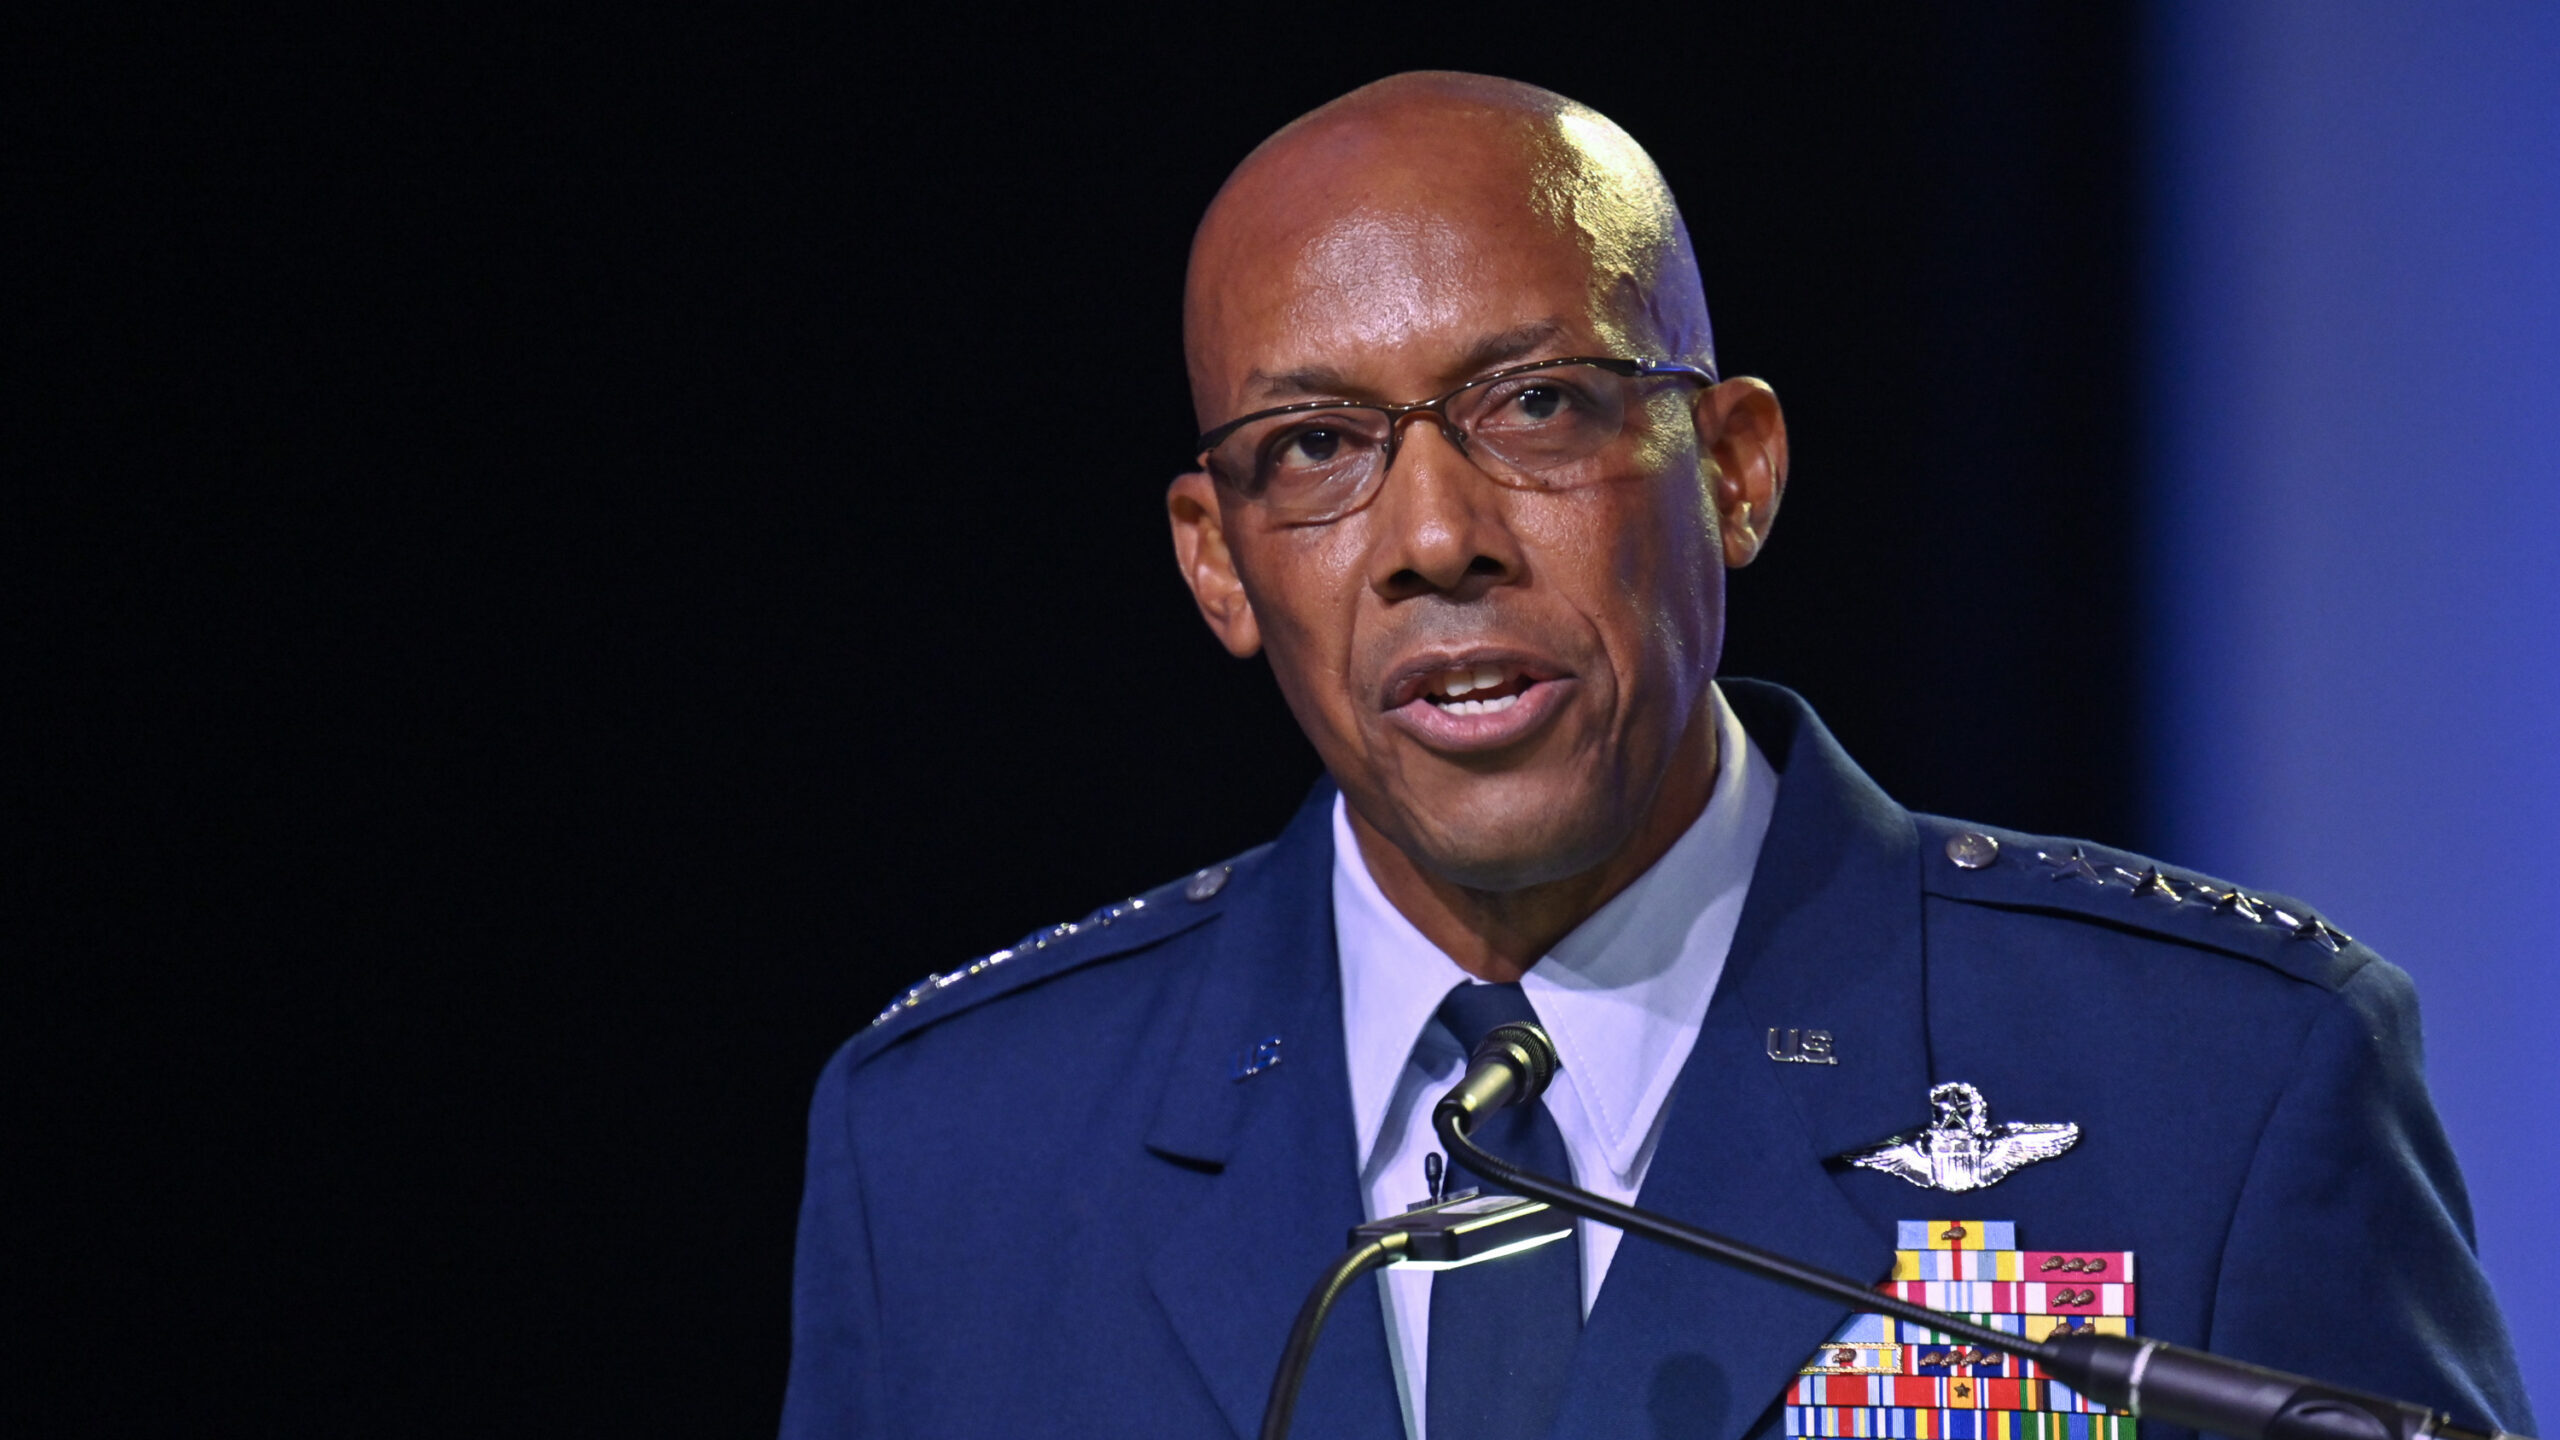 Air Force’s CQ Brown likely to be selected as next Chairman of the Joint Chiefs